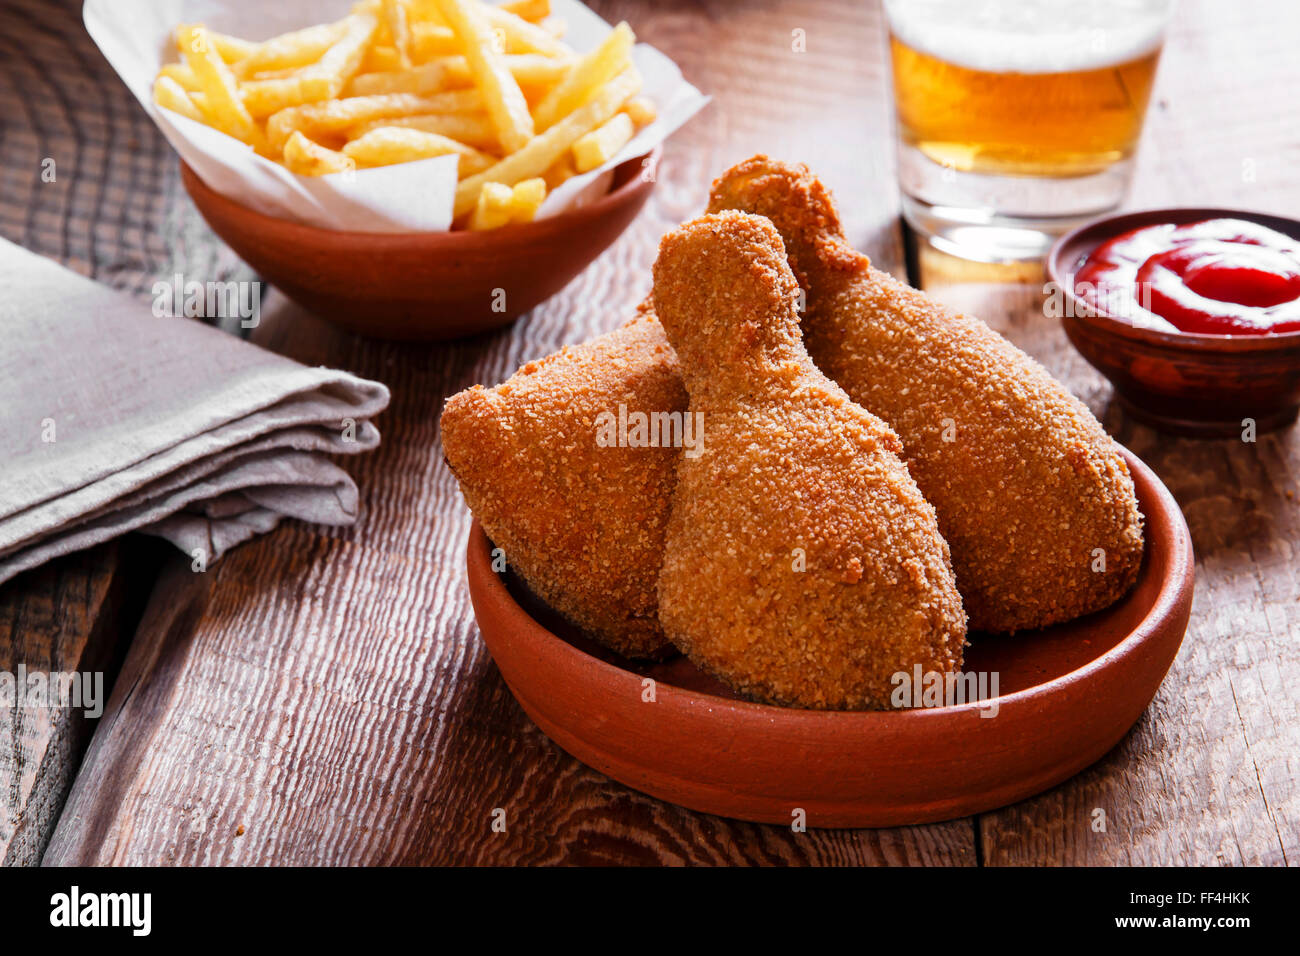 fried chicken leg in breadcrumbs and french fries Stock Photo